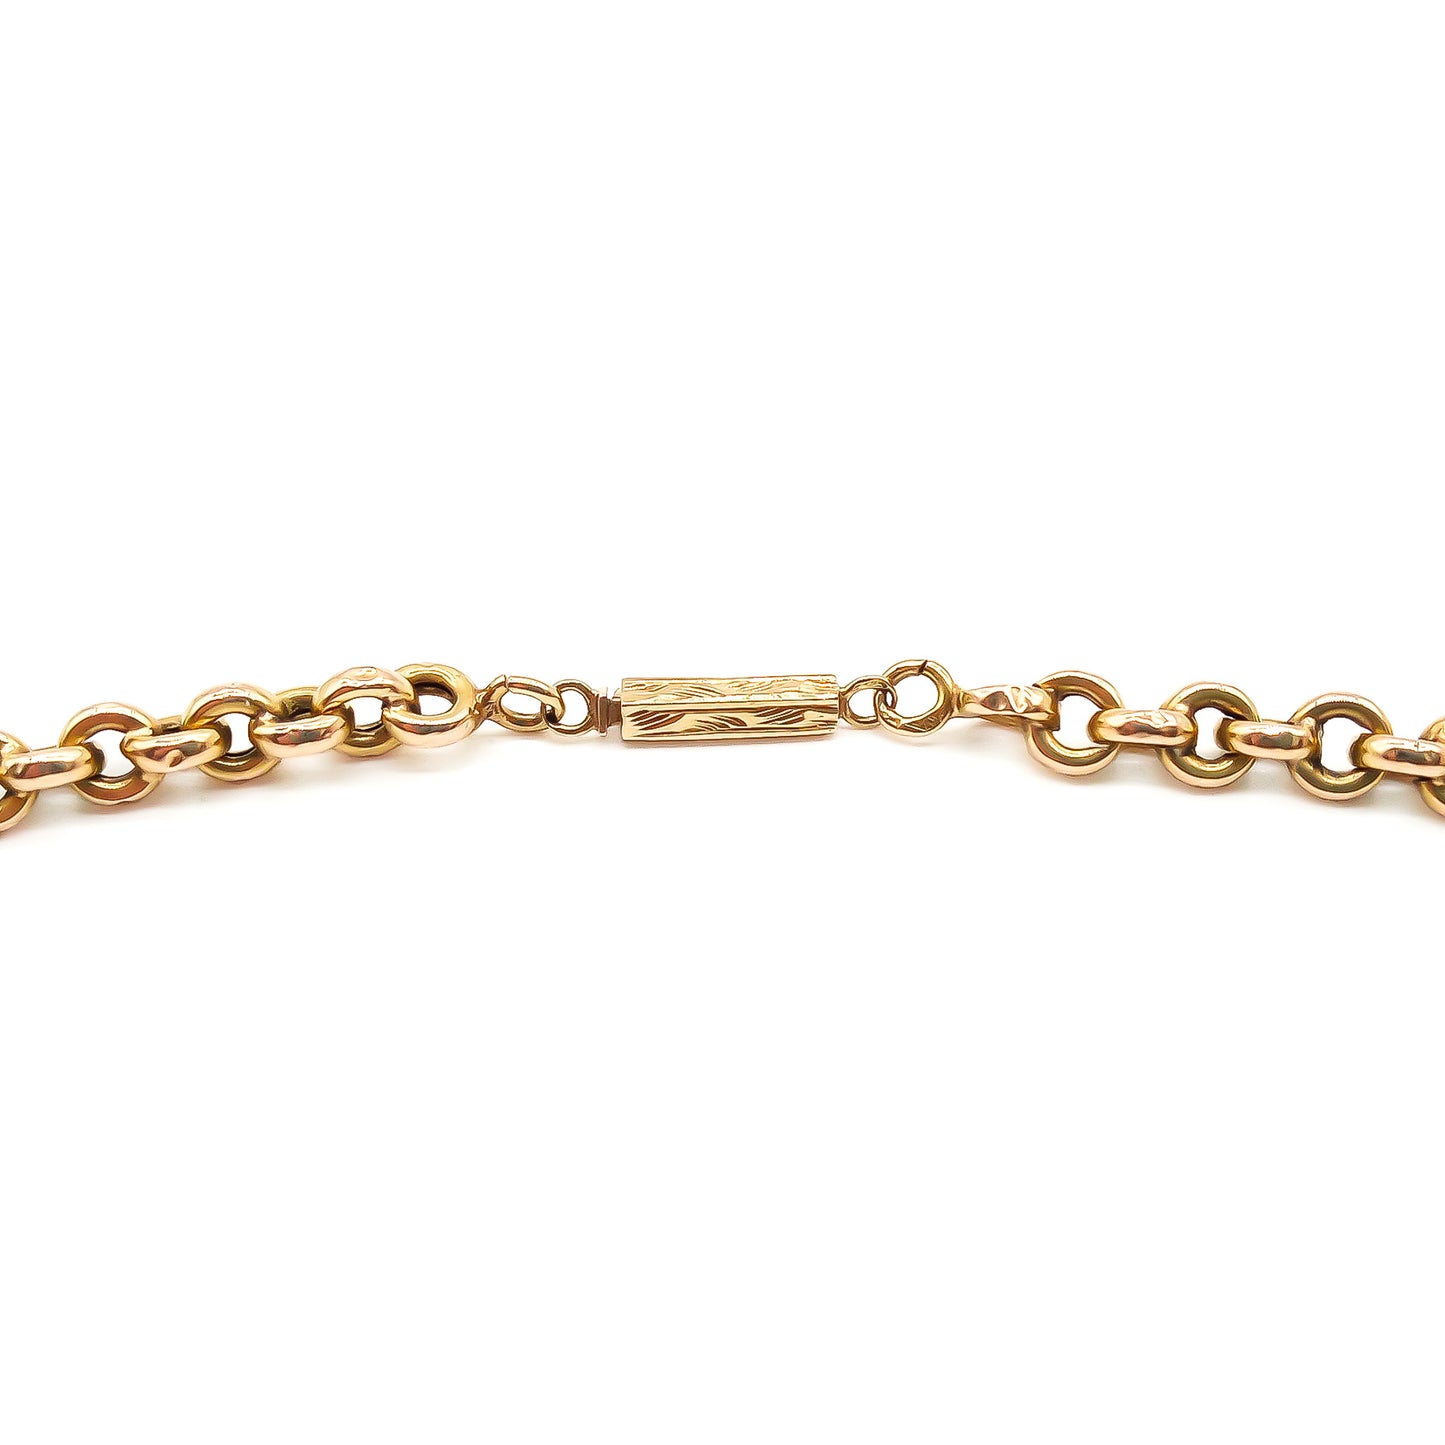 Classic Victorian 18ct rose gold belcher link chain.